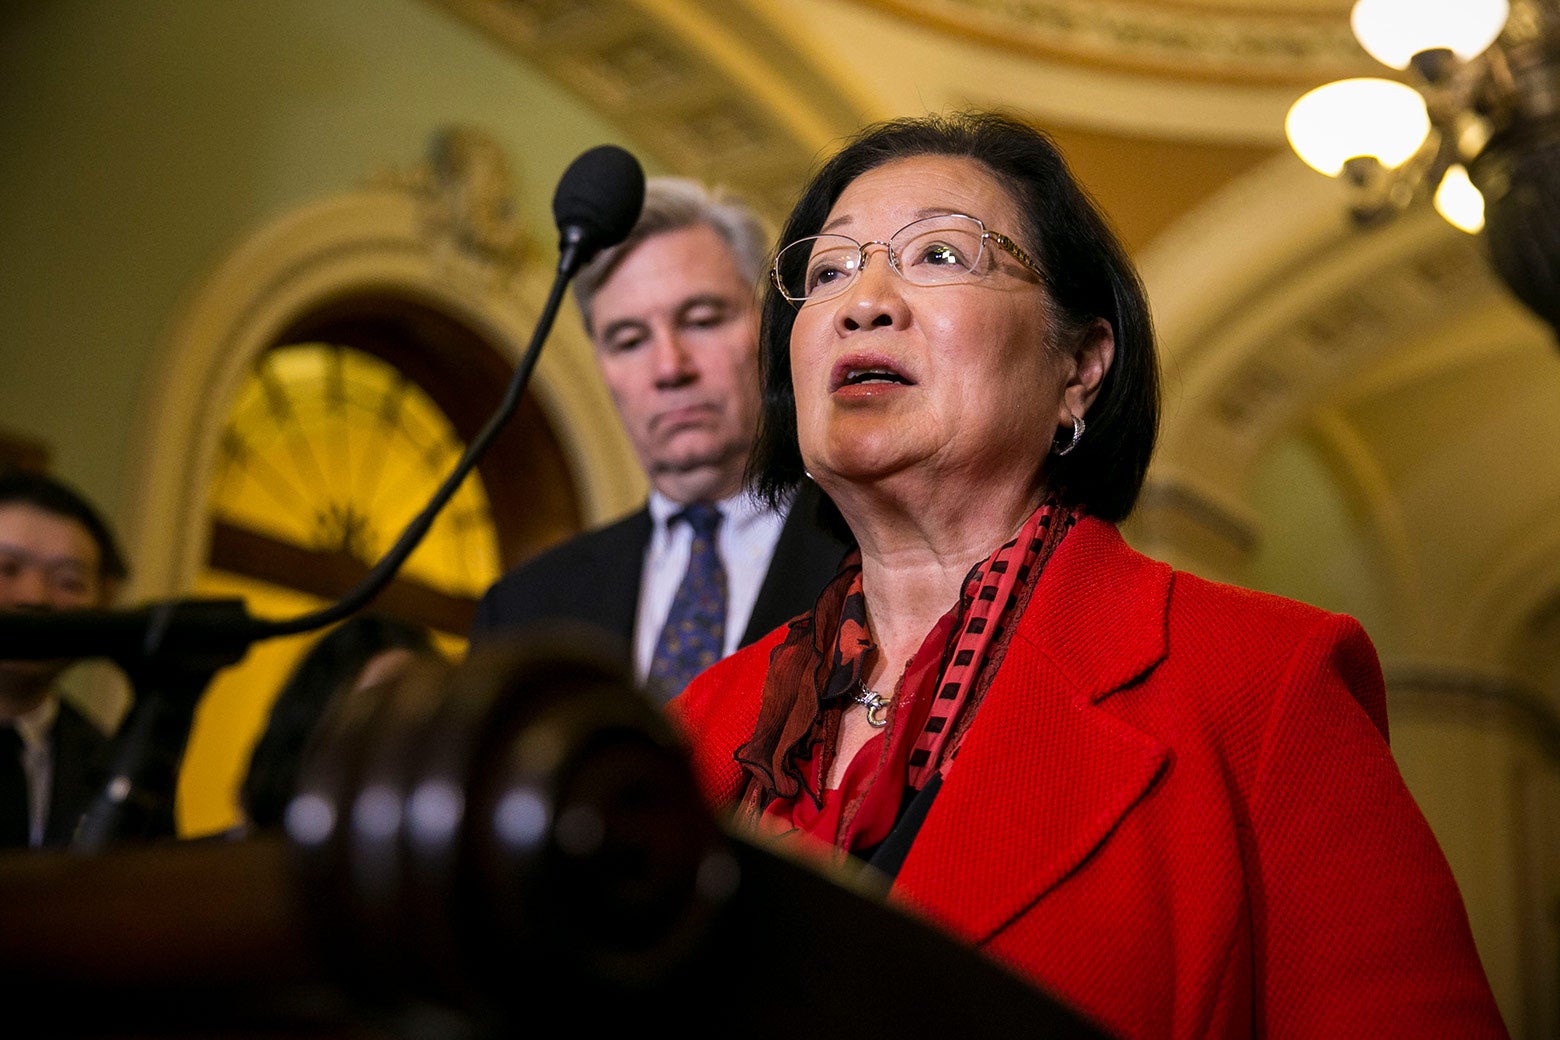 Sen. Mazie Hirono speaks to reporters about President Donald Trump’s recent tweets during a news conference on Capitol Hill Friday in Washington.